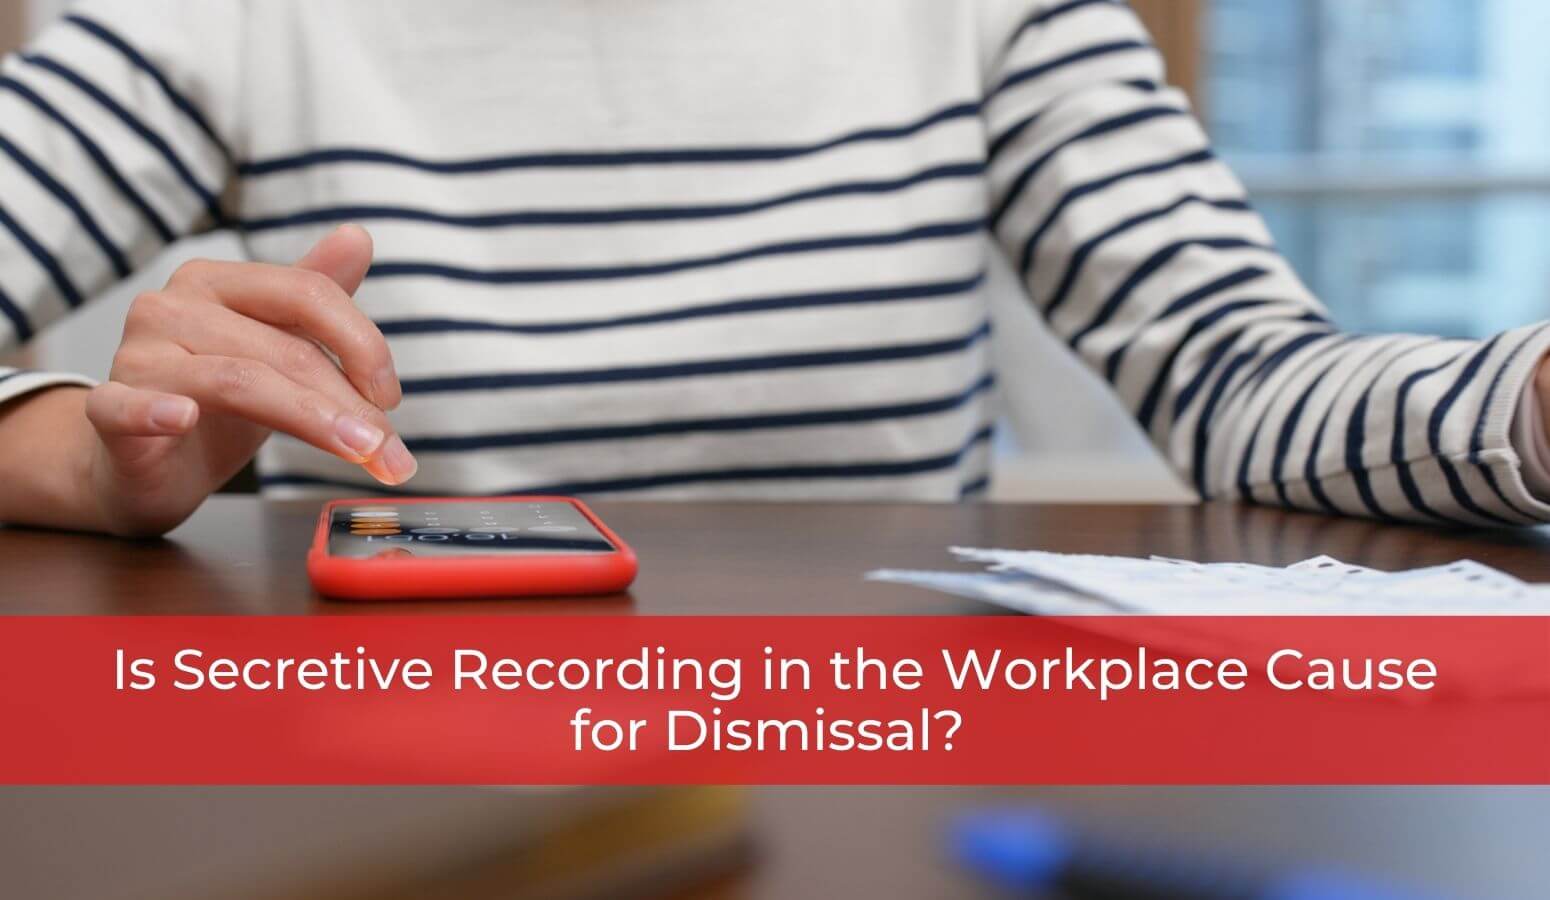 Featured image for “Is Secretive Recording in the Workplace Cause for Dismissal?”